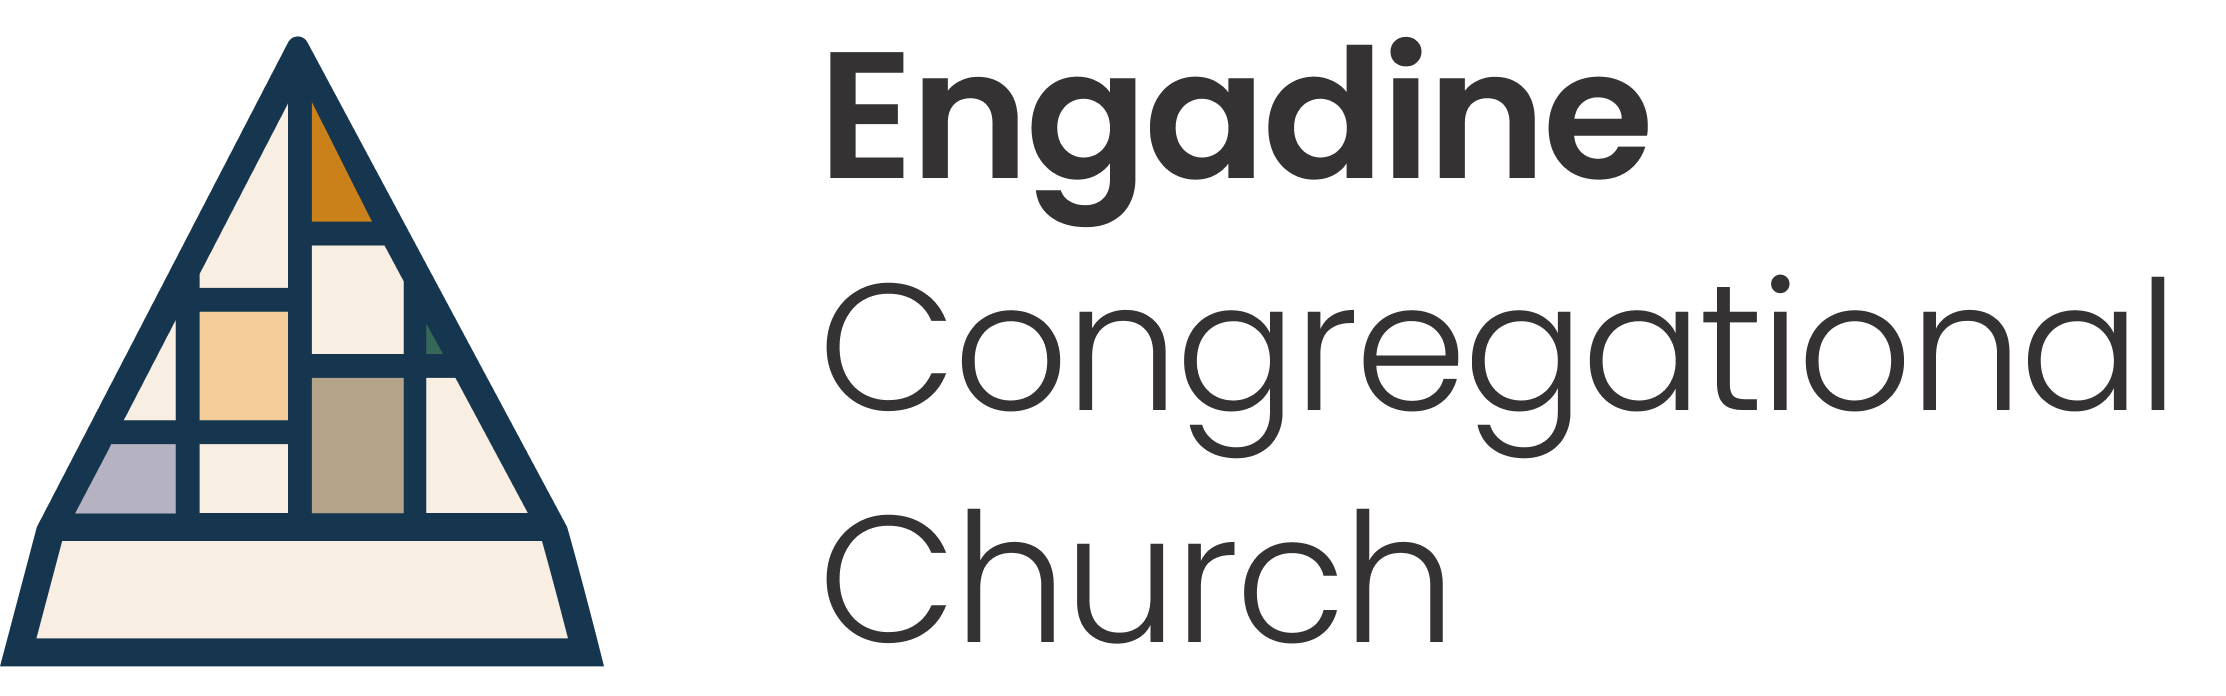 Engadine Congregational Church - A Place of Hope